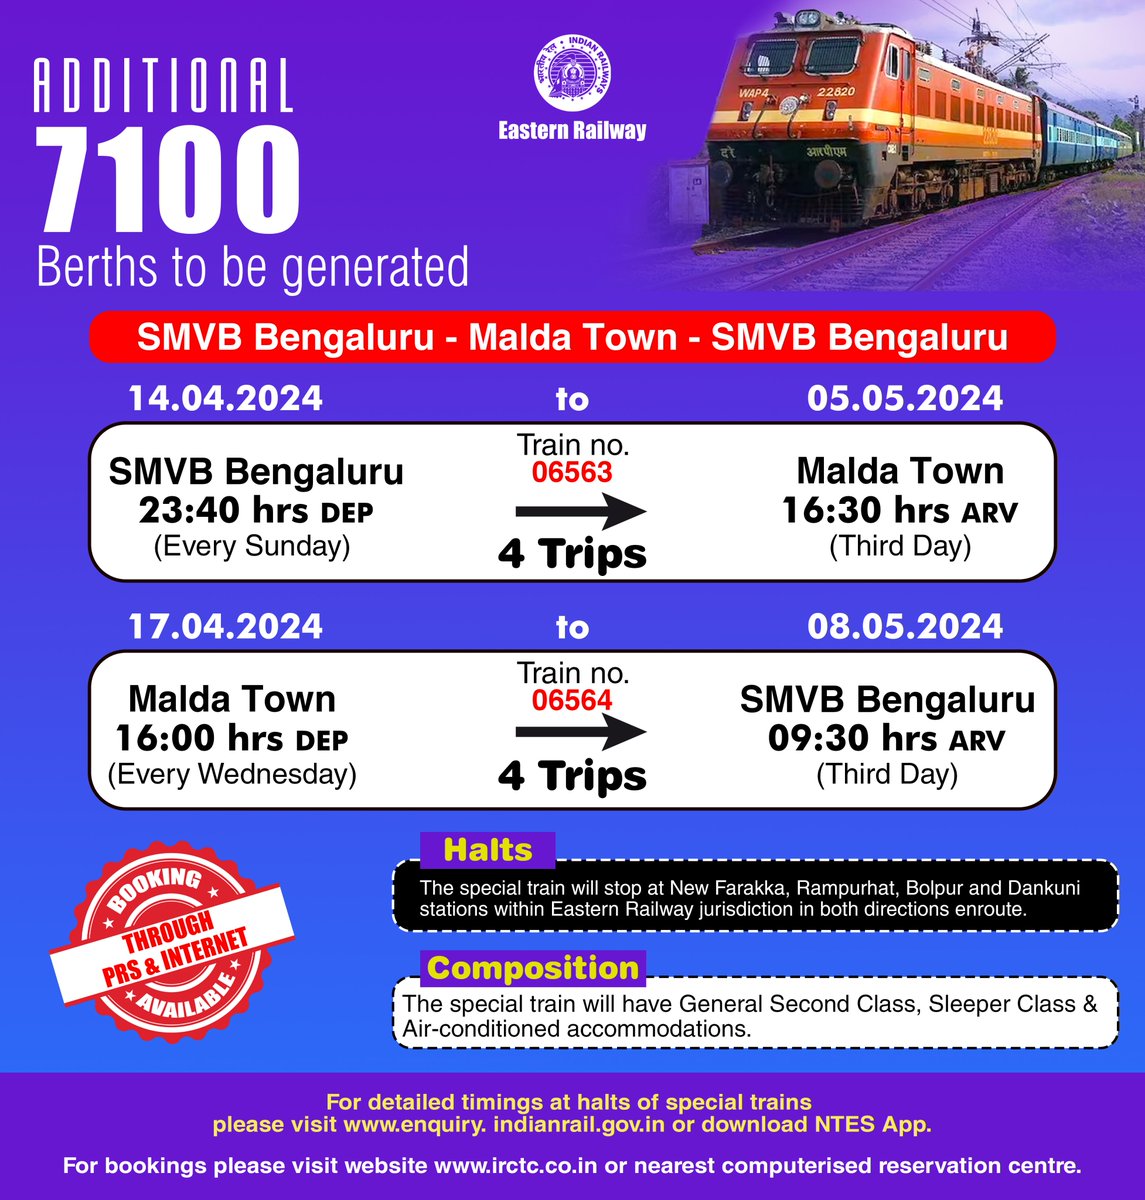 SUMMER SPECIAL TRAIN TO RUN BETWEEN MALDA TOWN & BENGALURU • Additional 7100 berths to be generated